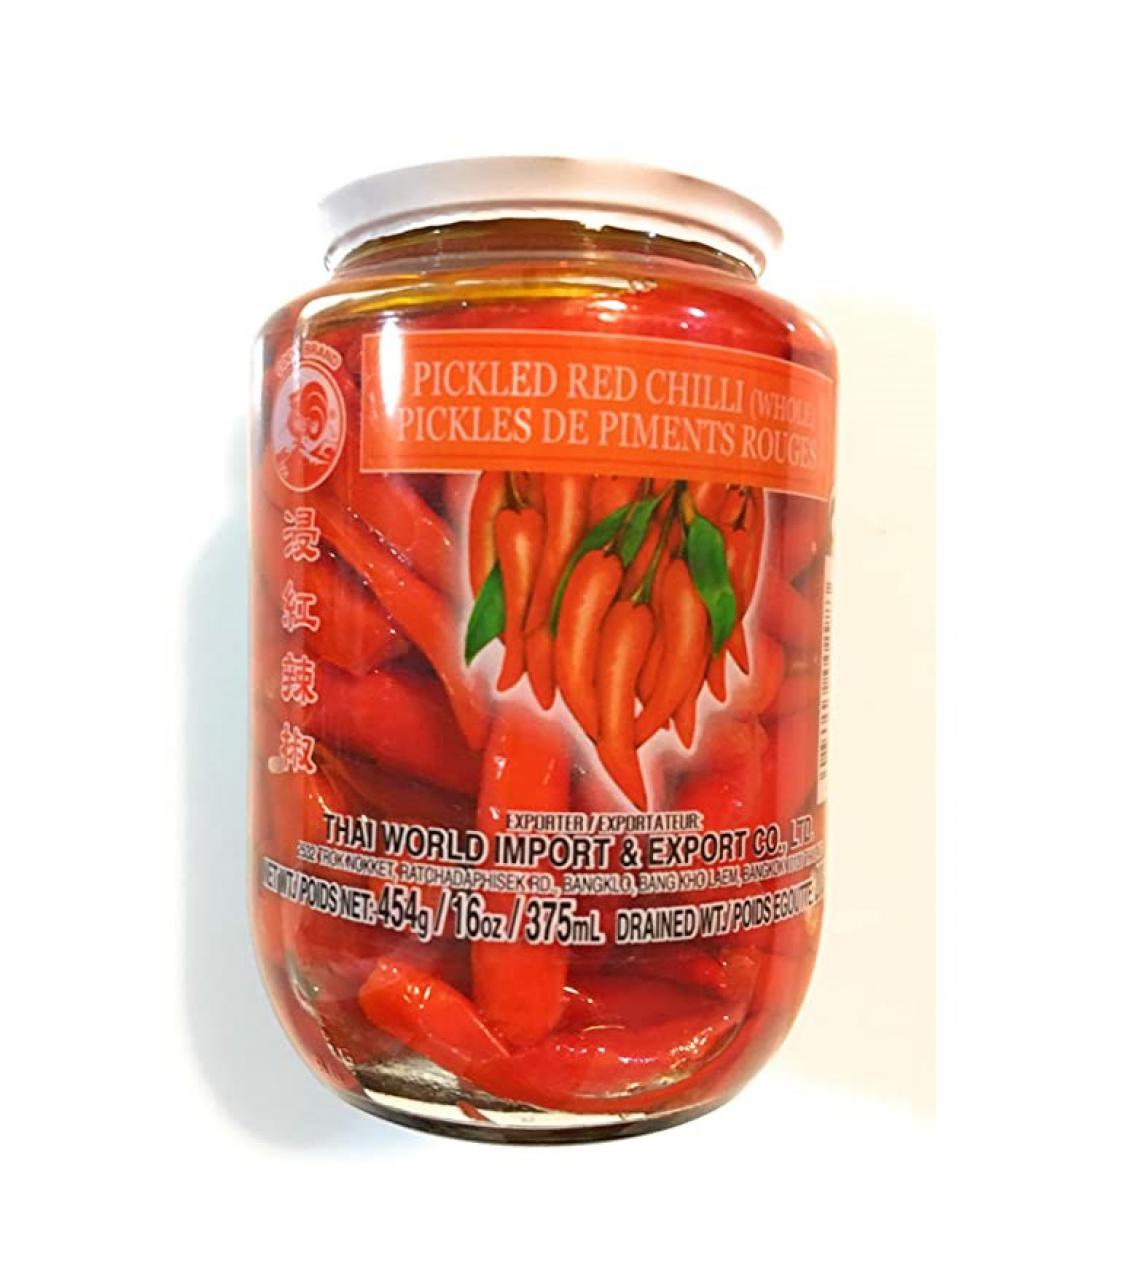 PICKLED RED CHILLI